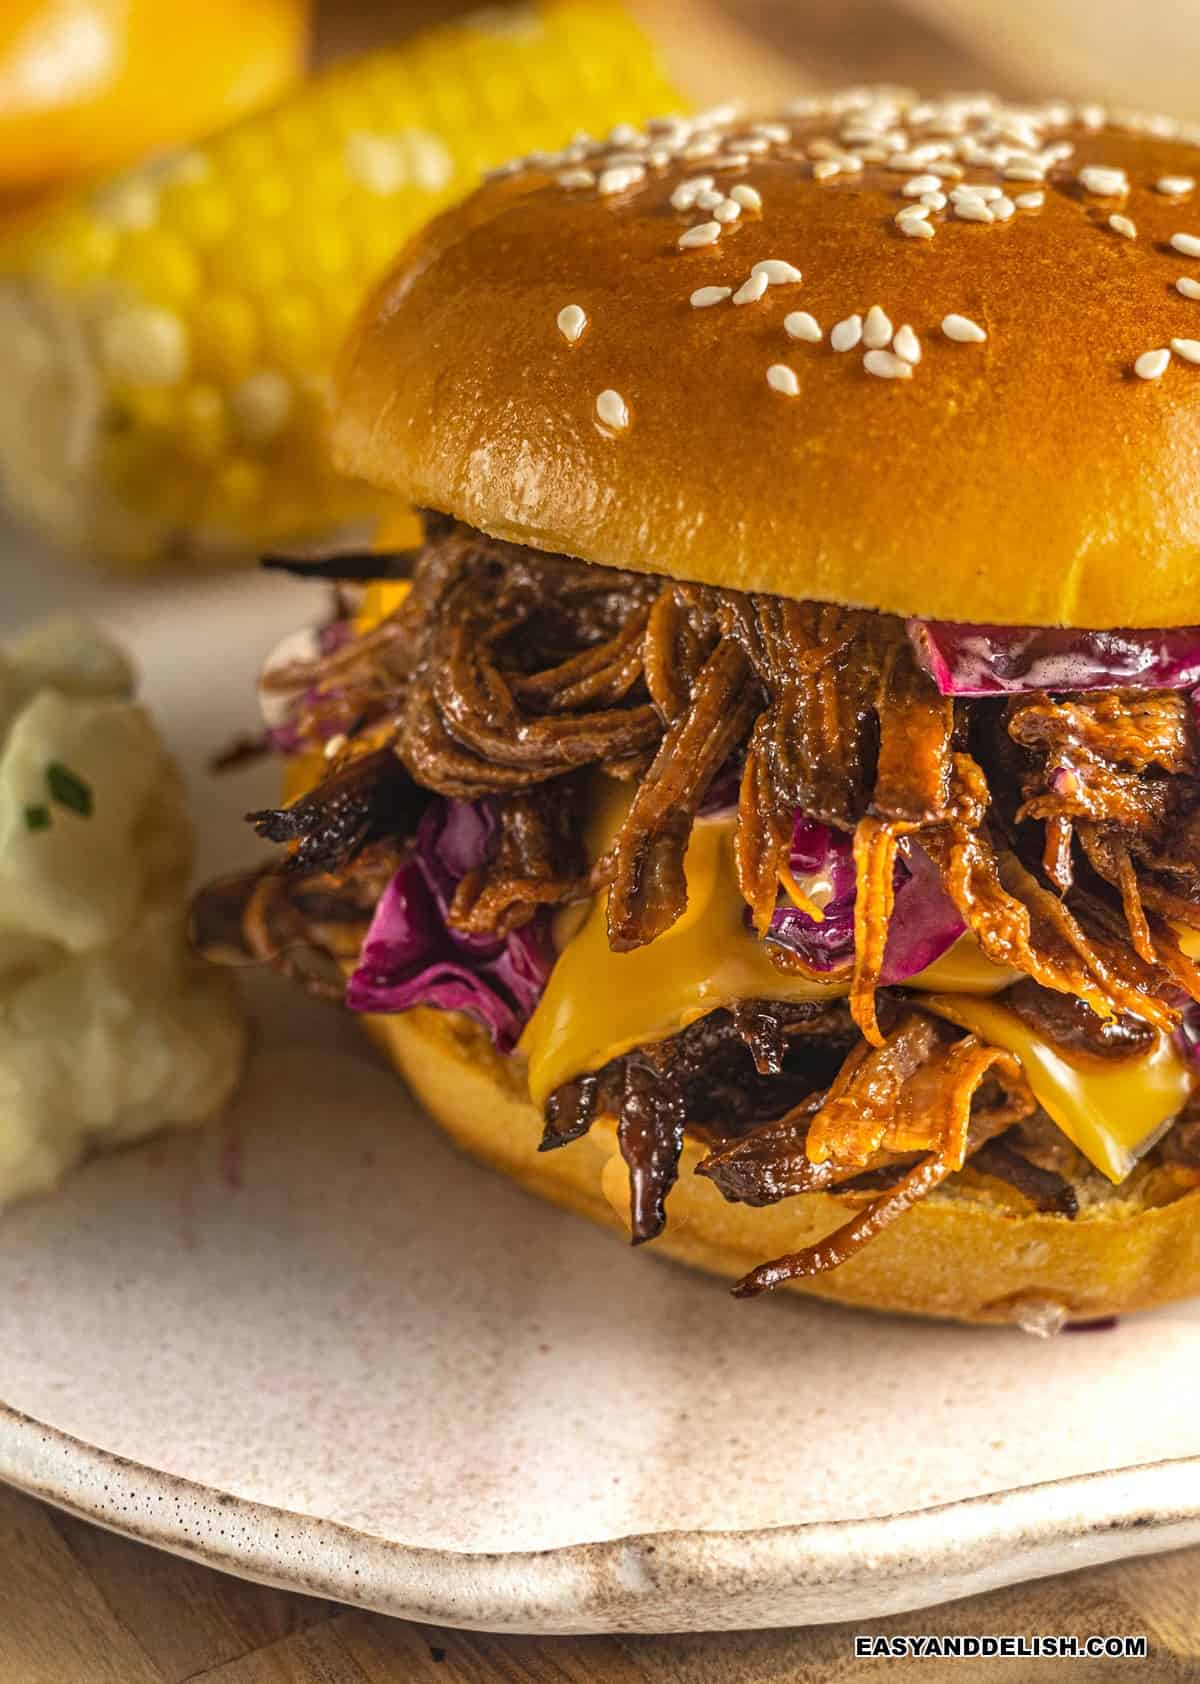 a plate with tender and juicy brisket sandwich with bbq sauce, melted cheese, and coleslaw.  